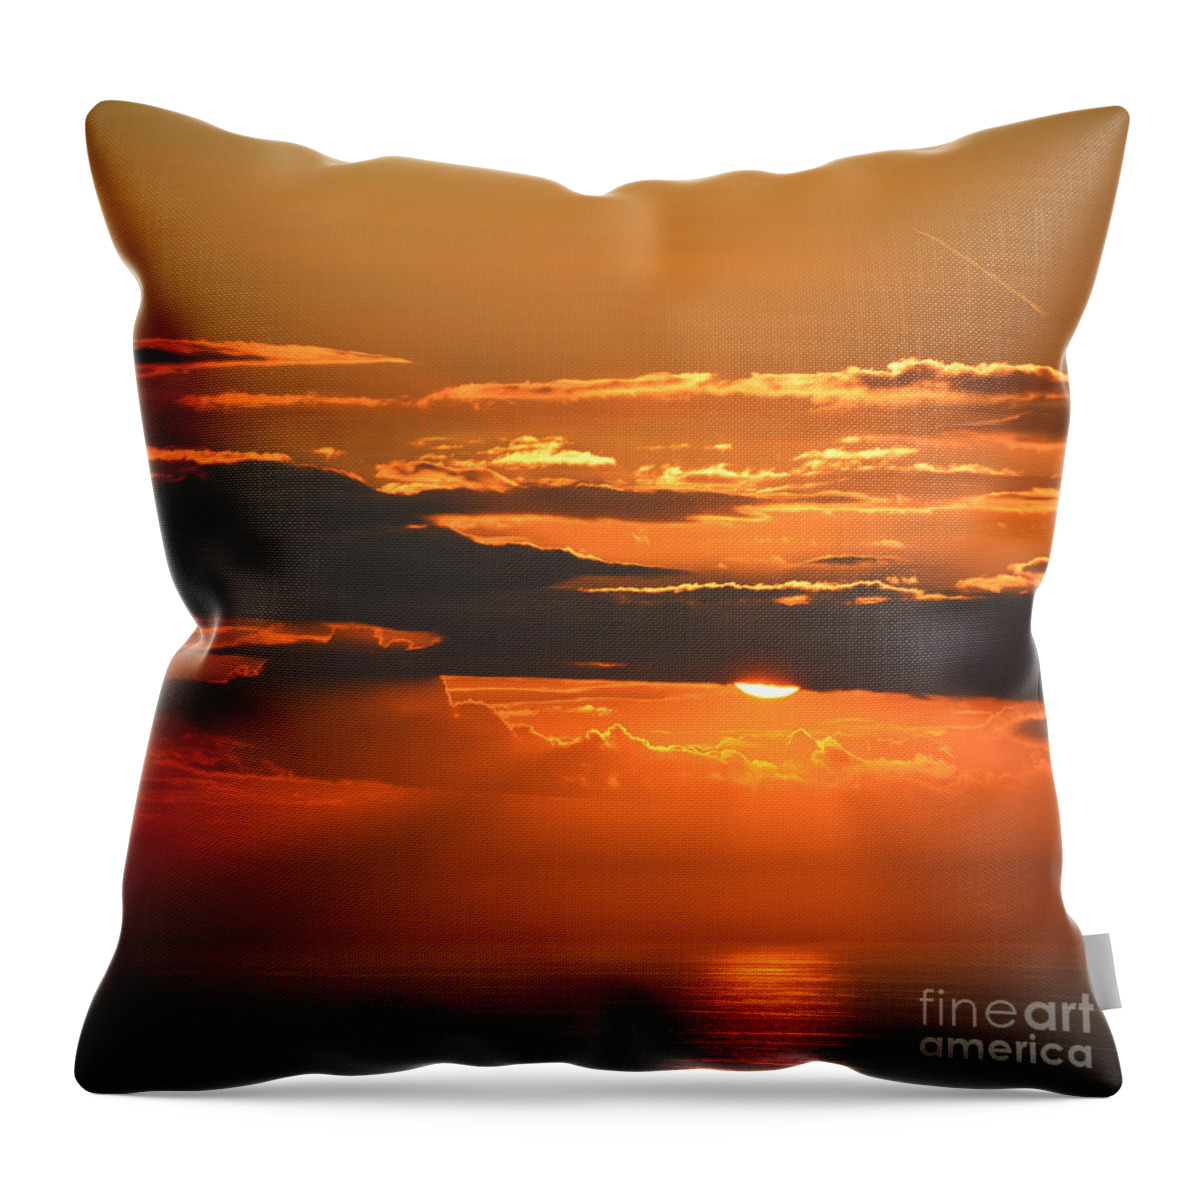 Emerging Throw Pillow featuring the photograph Emerging by Paul Davenport